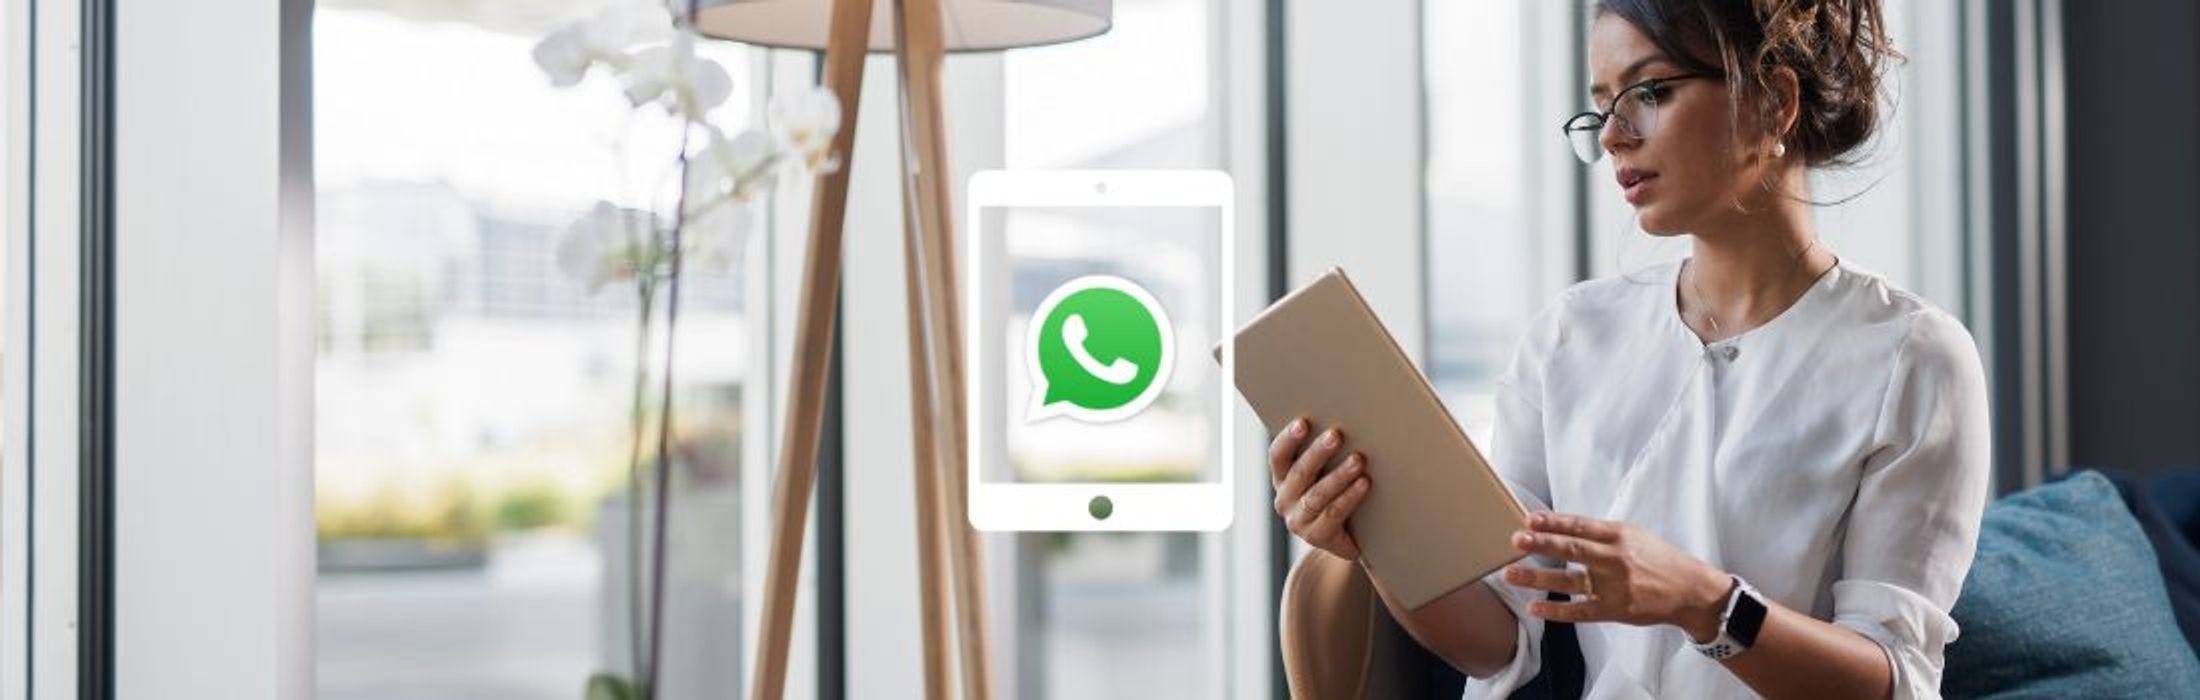 How To Use WhatsApp For iPad